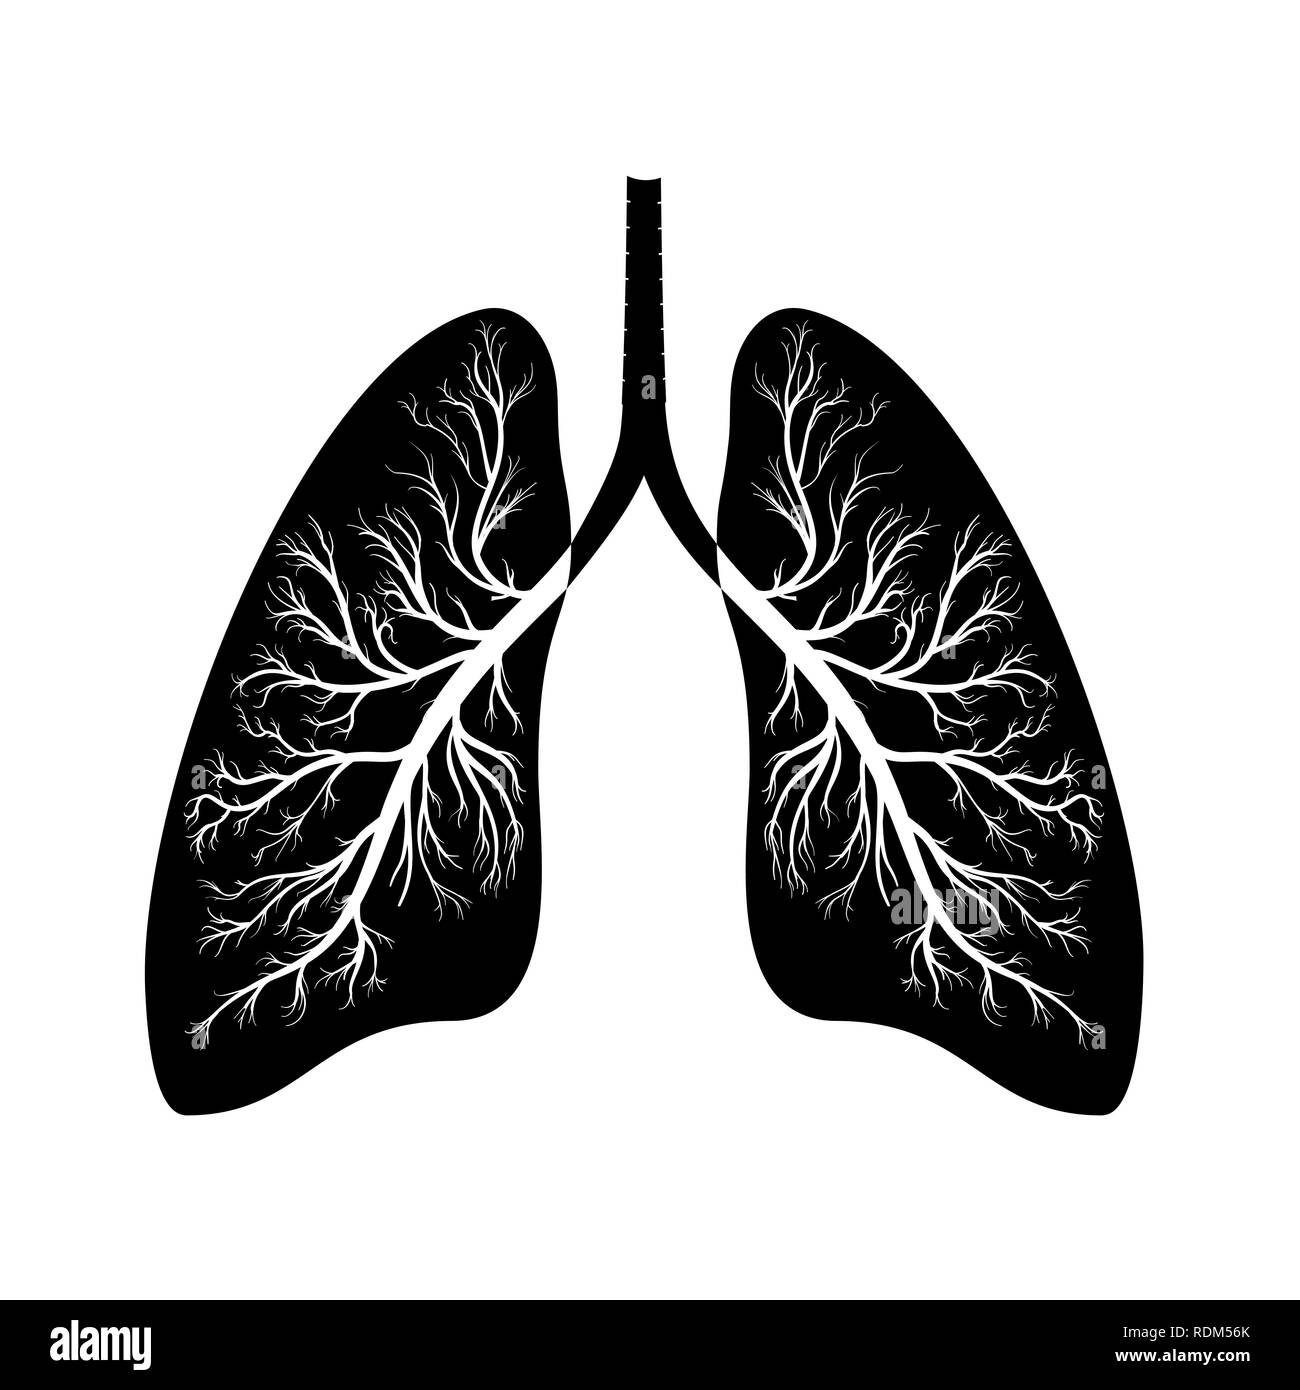 Lungs icon illustration Stock Vector